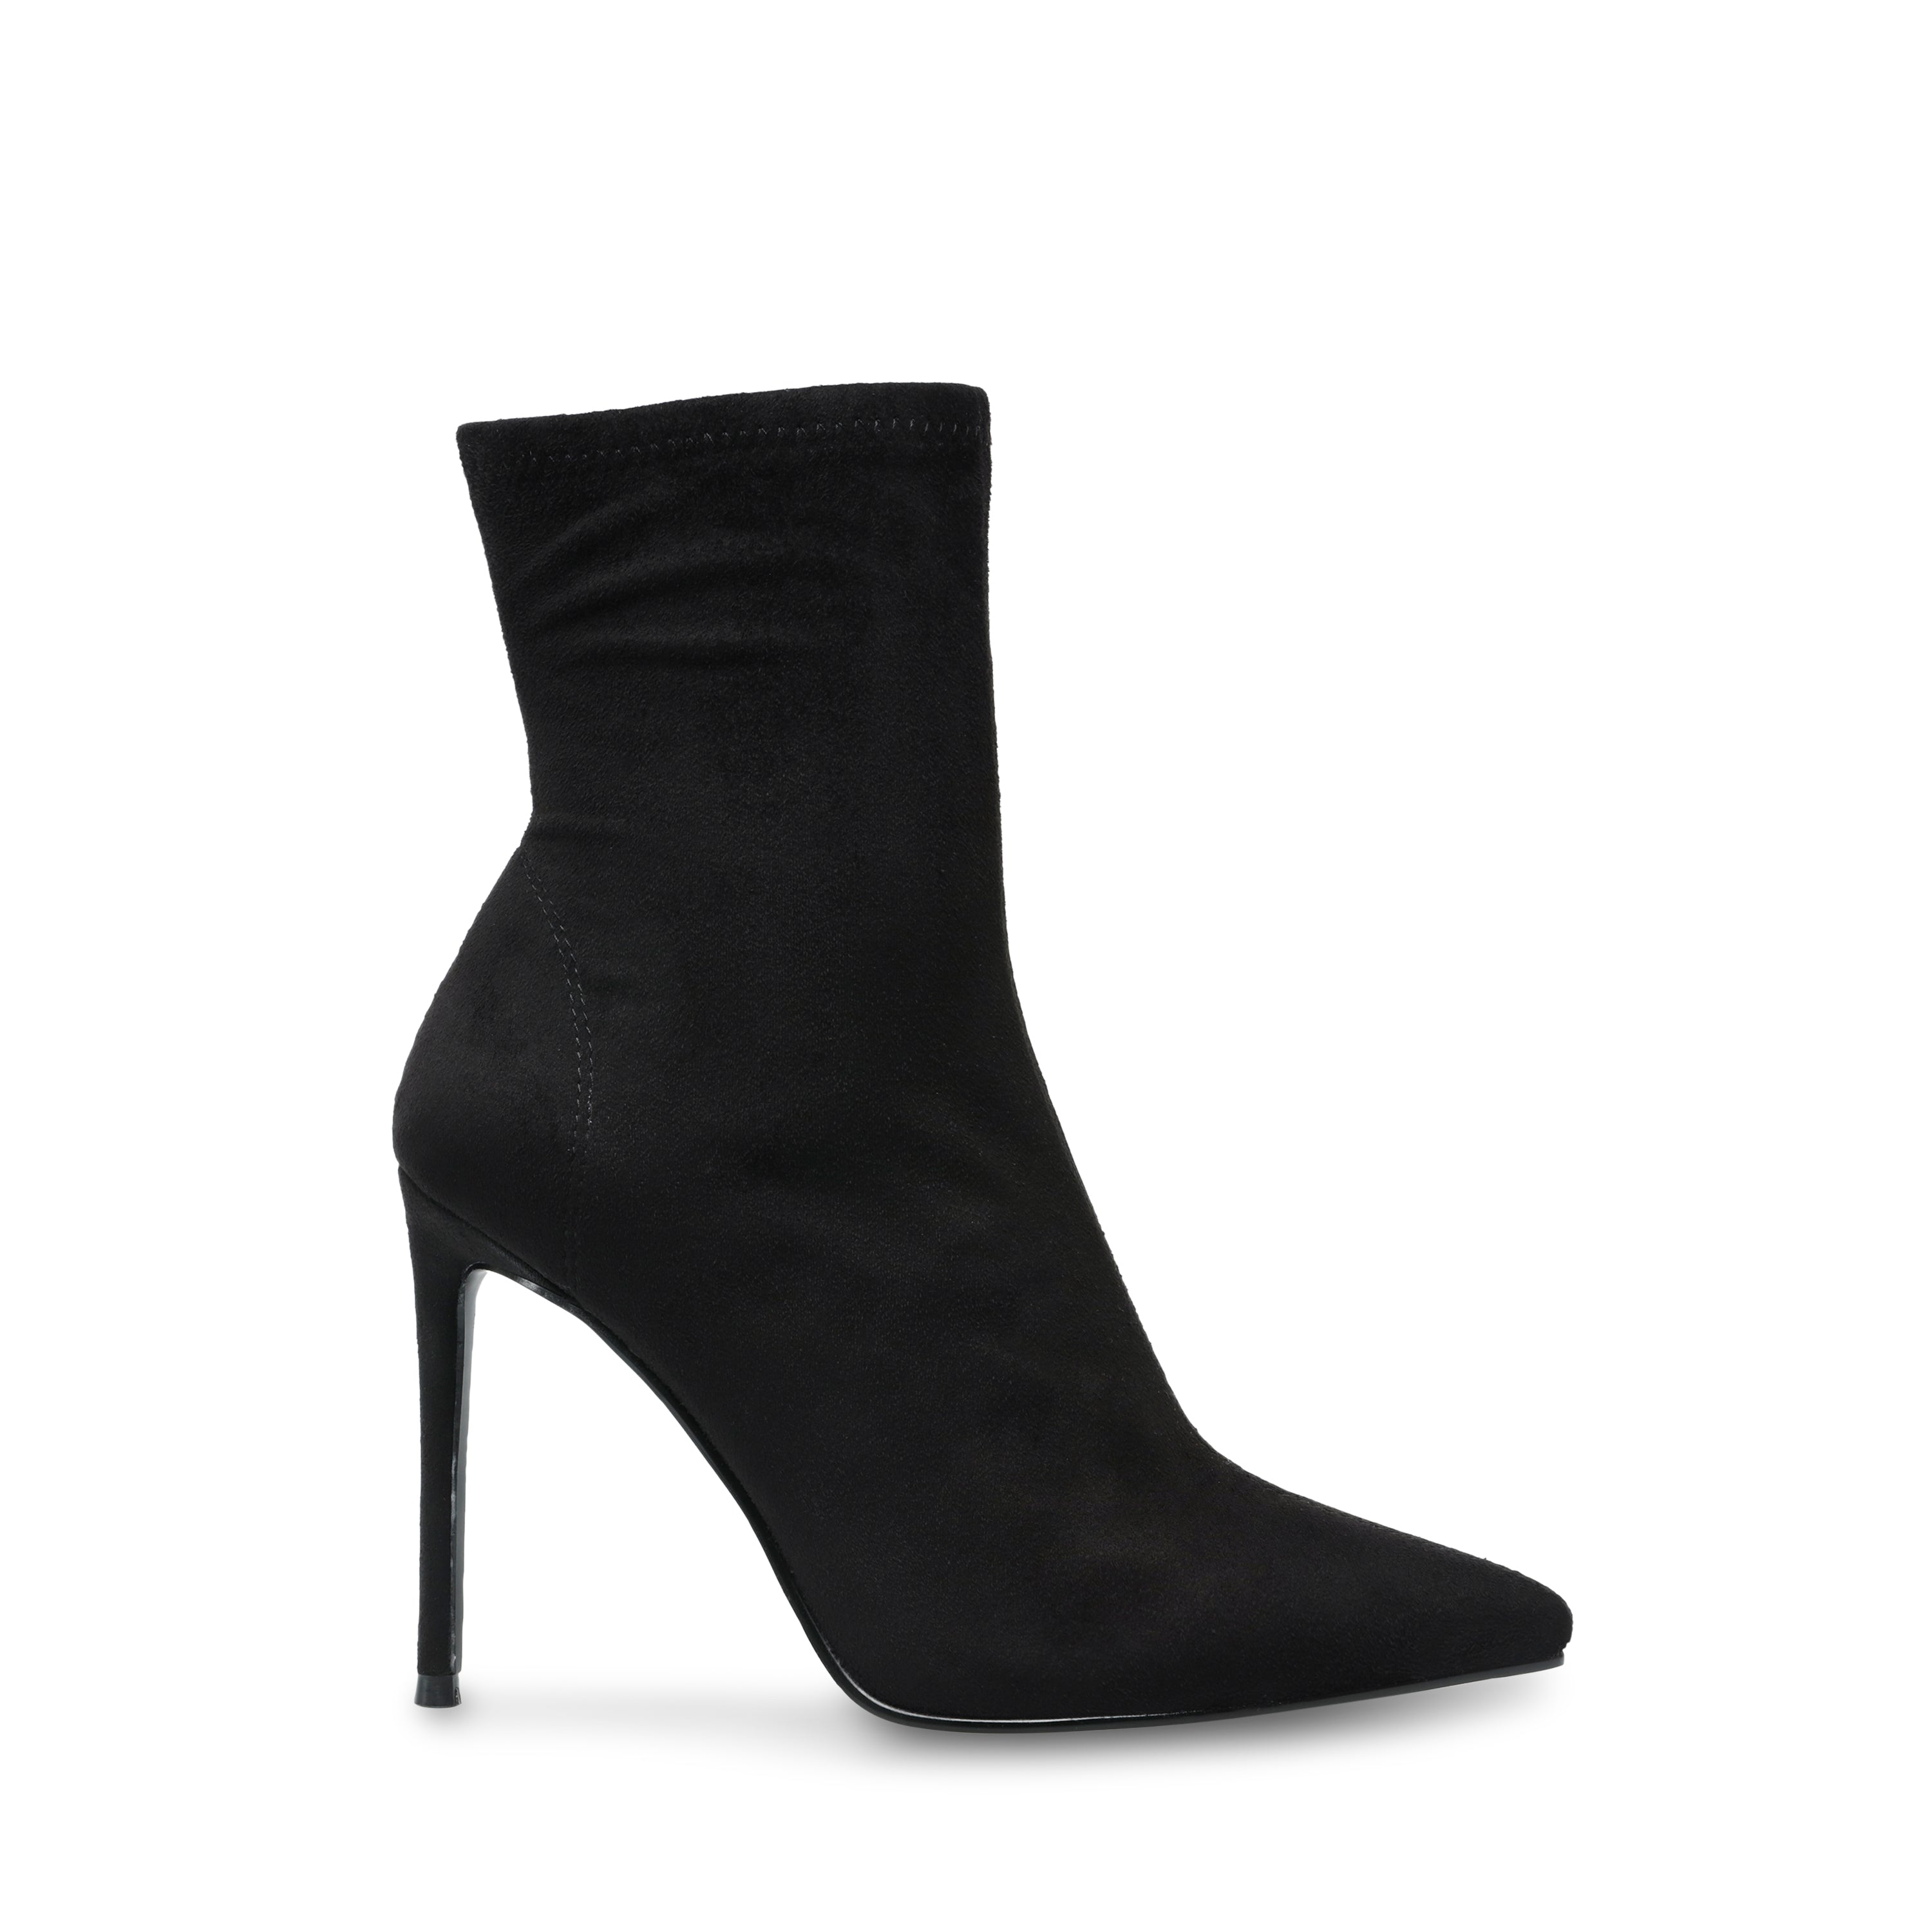 pozo Polvo comentario Women's Ankle Boots | Steve Madden UK® Official Site